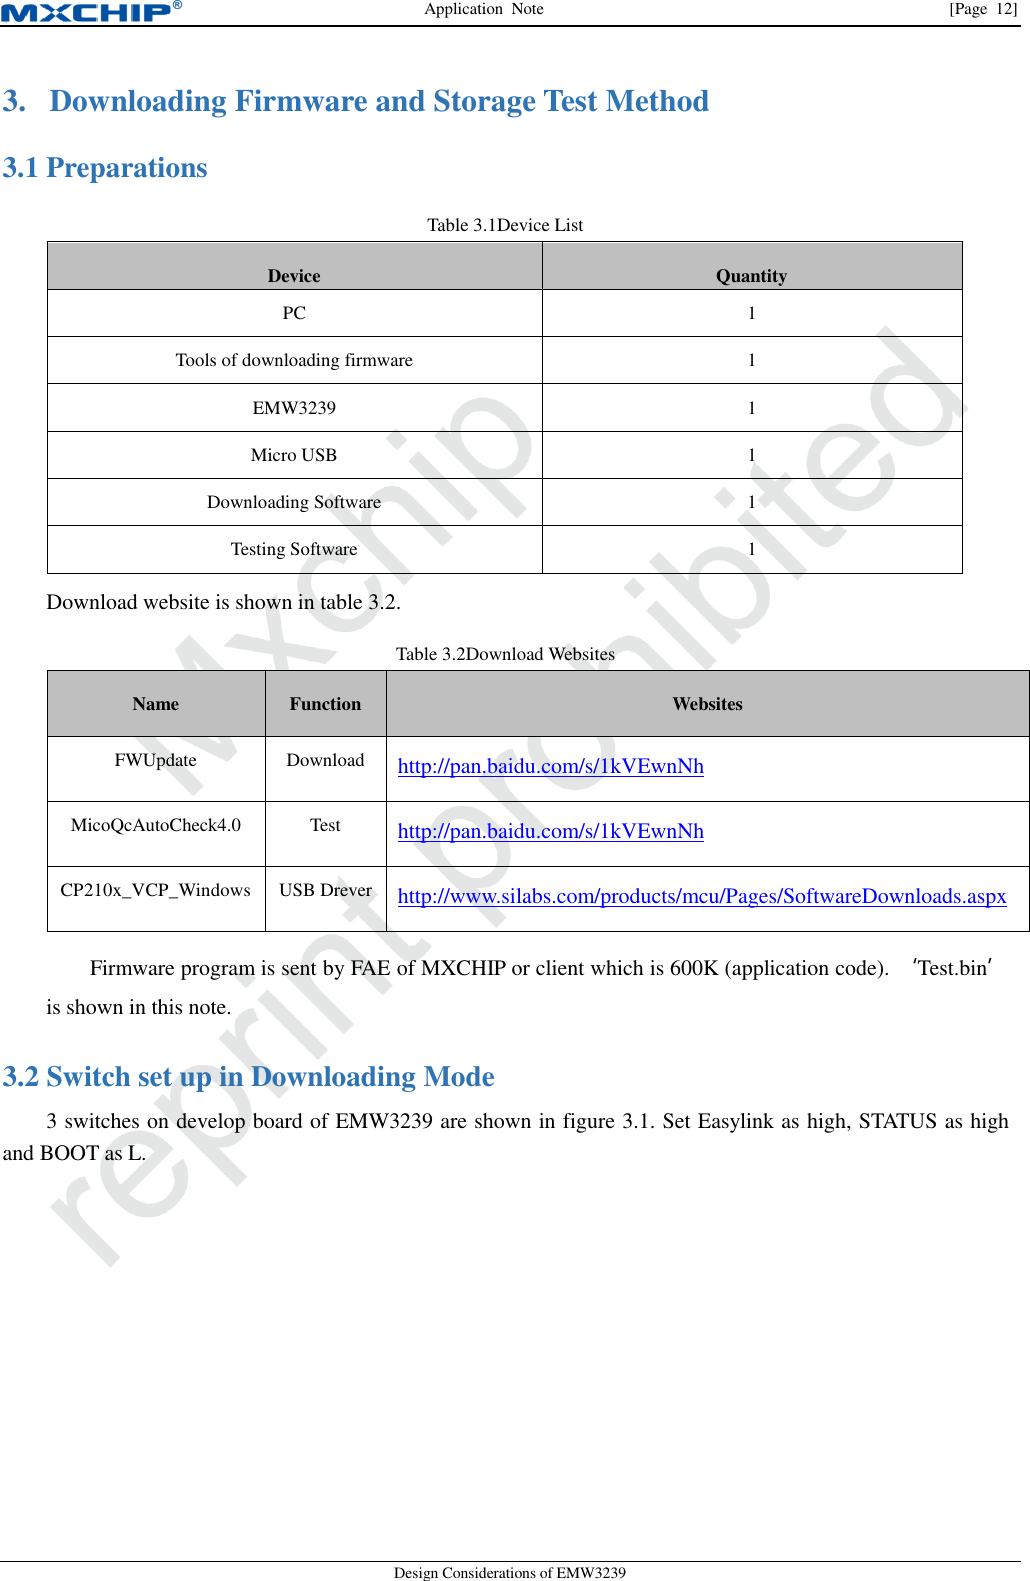 Application  Note                [Page  12] Design Considerations of EMW3239 3. Downloading Firmware and Storage Test Method  Preparations 3.1Table 3.1Device List Device Quantity PC 1 Tools of downloading firmware 1 EMW3239 1 Micro USB 1 Downloading Software 1 Testing Software 1 Download website is shown in table 3.2. Table 3.2Download Websites Name Function Websites FWUpdate Download http://pan.baidu.com/s/1kVEwnNh   MicoQcAutoCheck4.0 Test http://pan.baidu.com/s/1kVEwnNh   CP210x_VCP_Windows USB Drever http://www.silabs.com/products/mcu/Pages/SoftwareDownloads.aspx Firmware program is sent by FAE of MXCHIP or client which is 600K (application code). ‘Test.bin’ is shown in this note.  Switch set up in Downloading Mode 3.23 switches on develop board of EMW3239 are shown in figure 3.1. Set Easylink as high, STATUS as high and BOOT as L.   